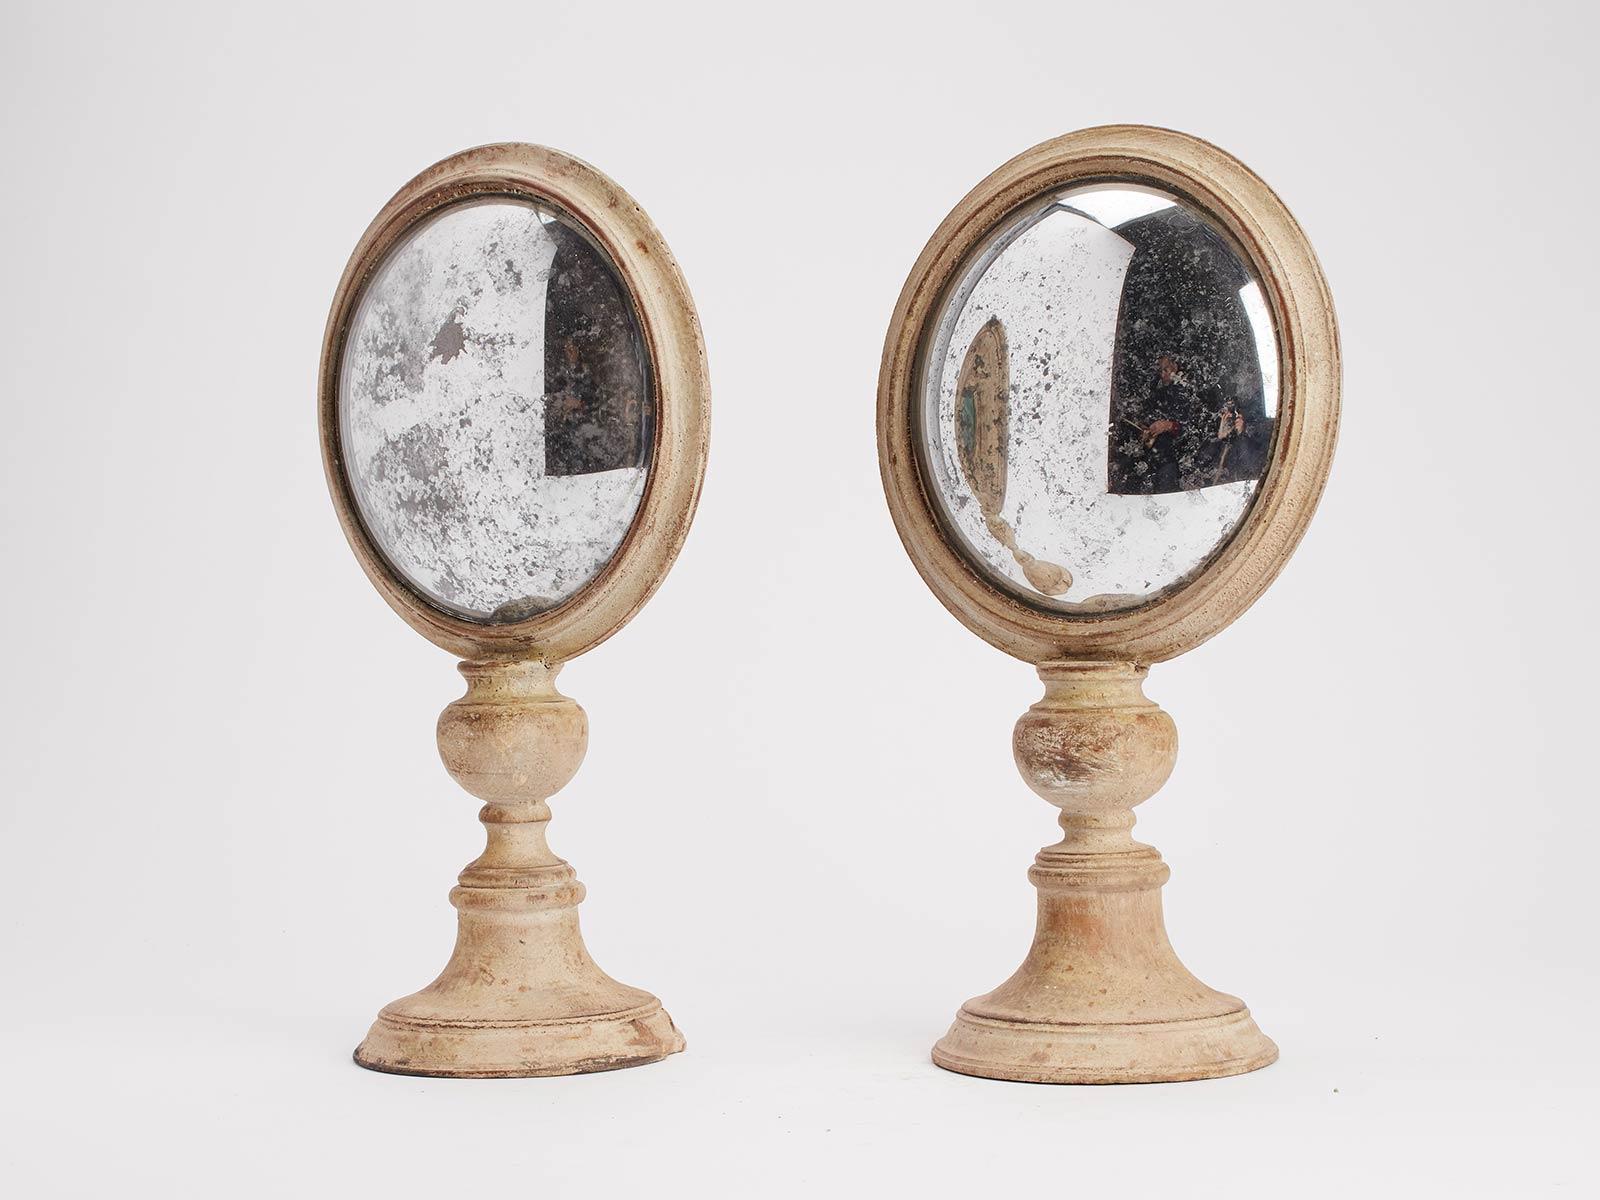 A couple of Wunderkammer round curved mirrors with white wooden frames mounted over white wooden round bases. On the rear of the frame, there is one round malachite stone, Italy, circa 1870.